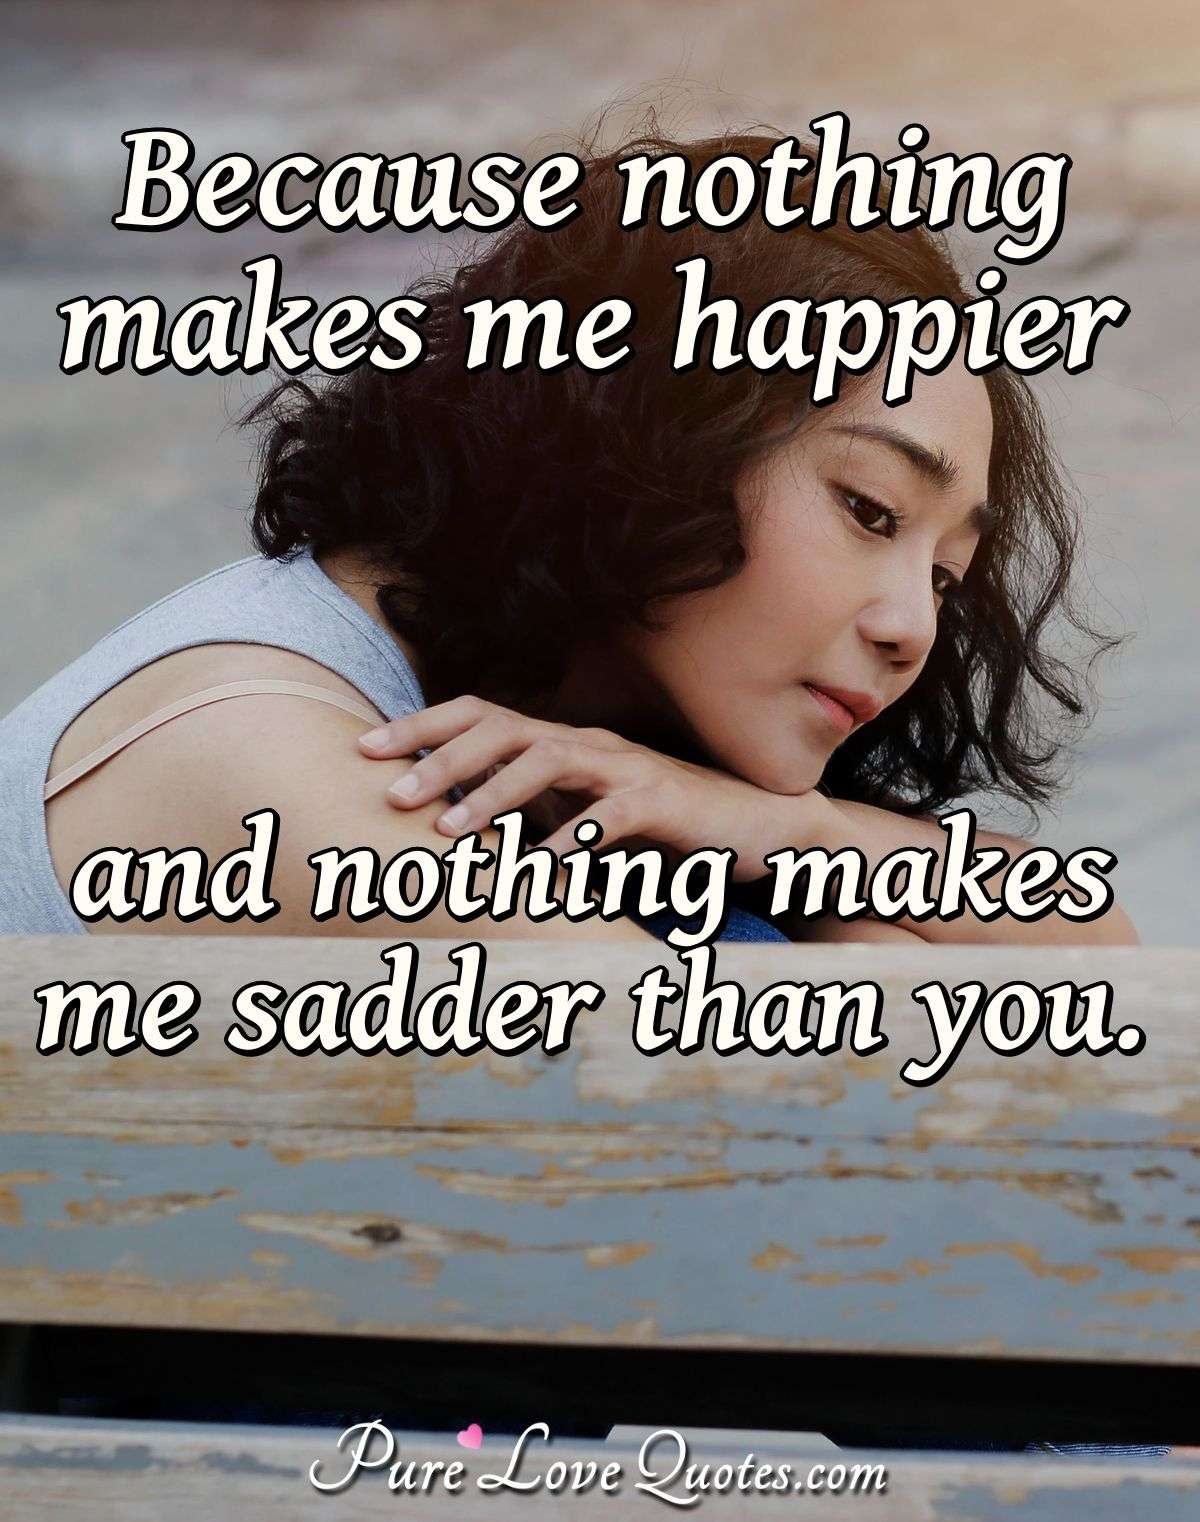 Because nothing makes me happier and nothing makes me sadder than you. - Anonymous